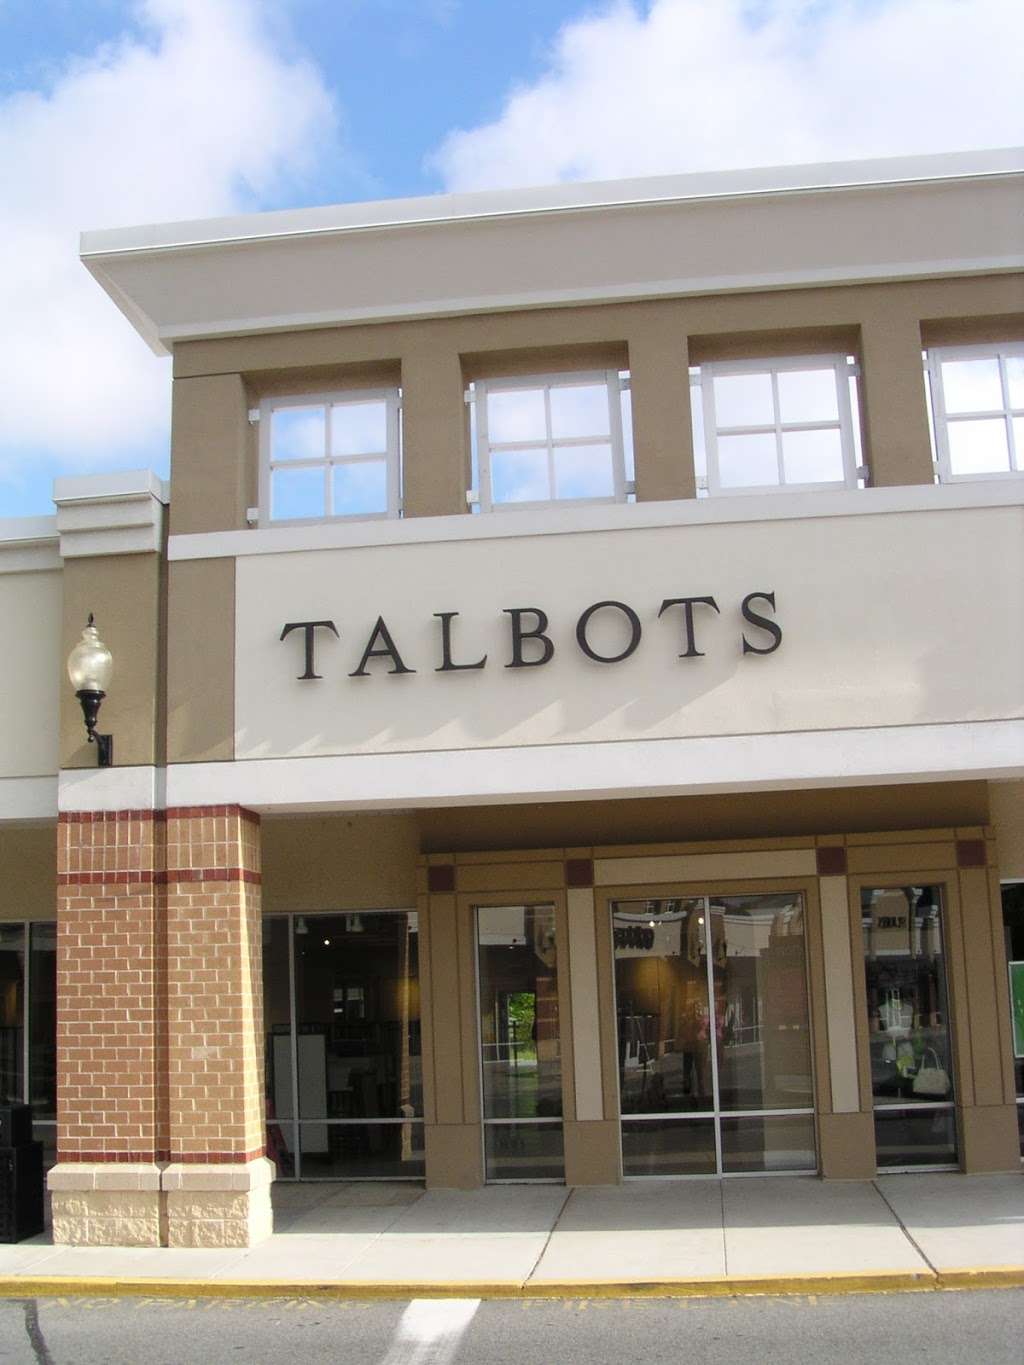 Talbots | Queenstowns Premium Outlets, 401 Outlet Center Dr, Queenstown, MD 21658 | Phone: (410) 827-9012